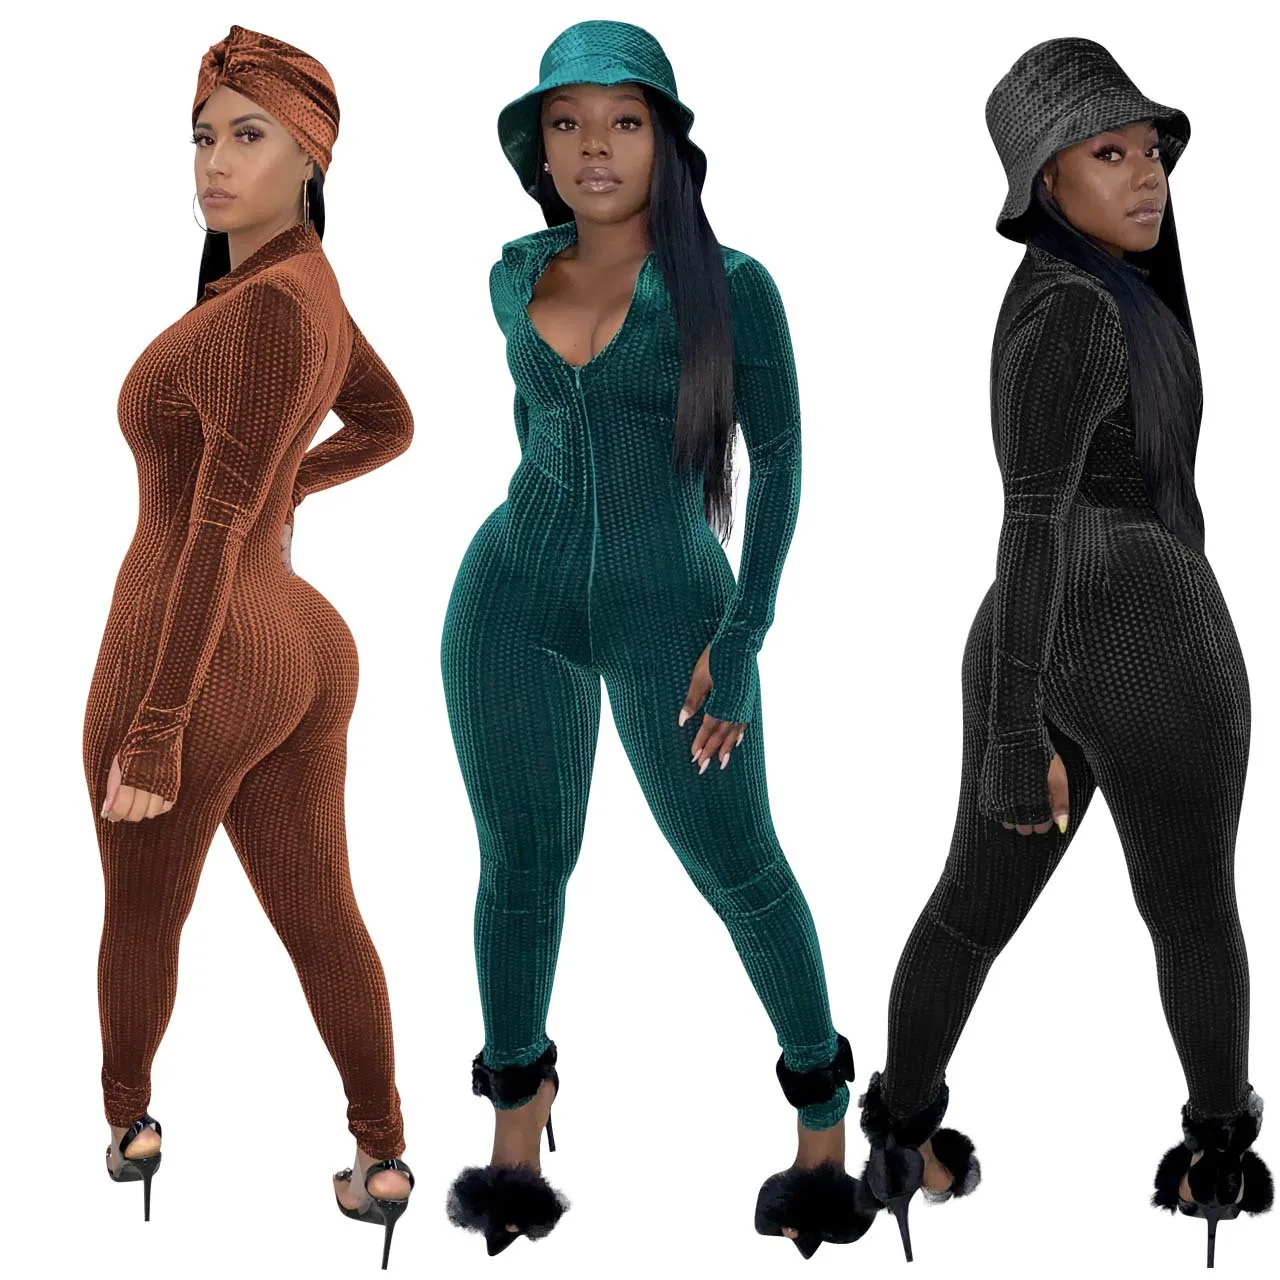 

2021 autumn and winter suede women's jump suit sexy women's sexy jumpsuit V-neck solid color jumpsuit